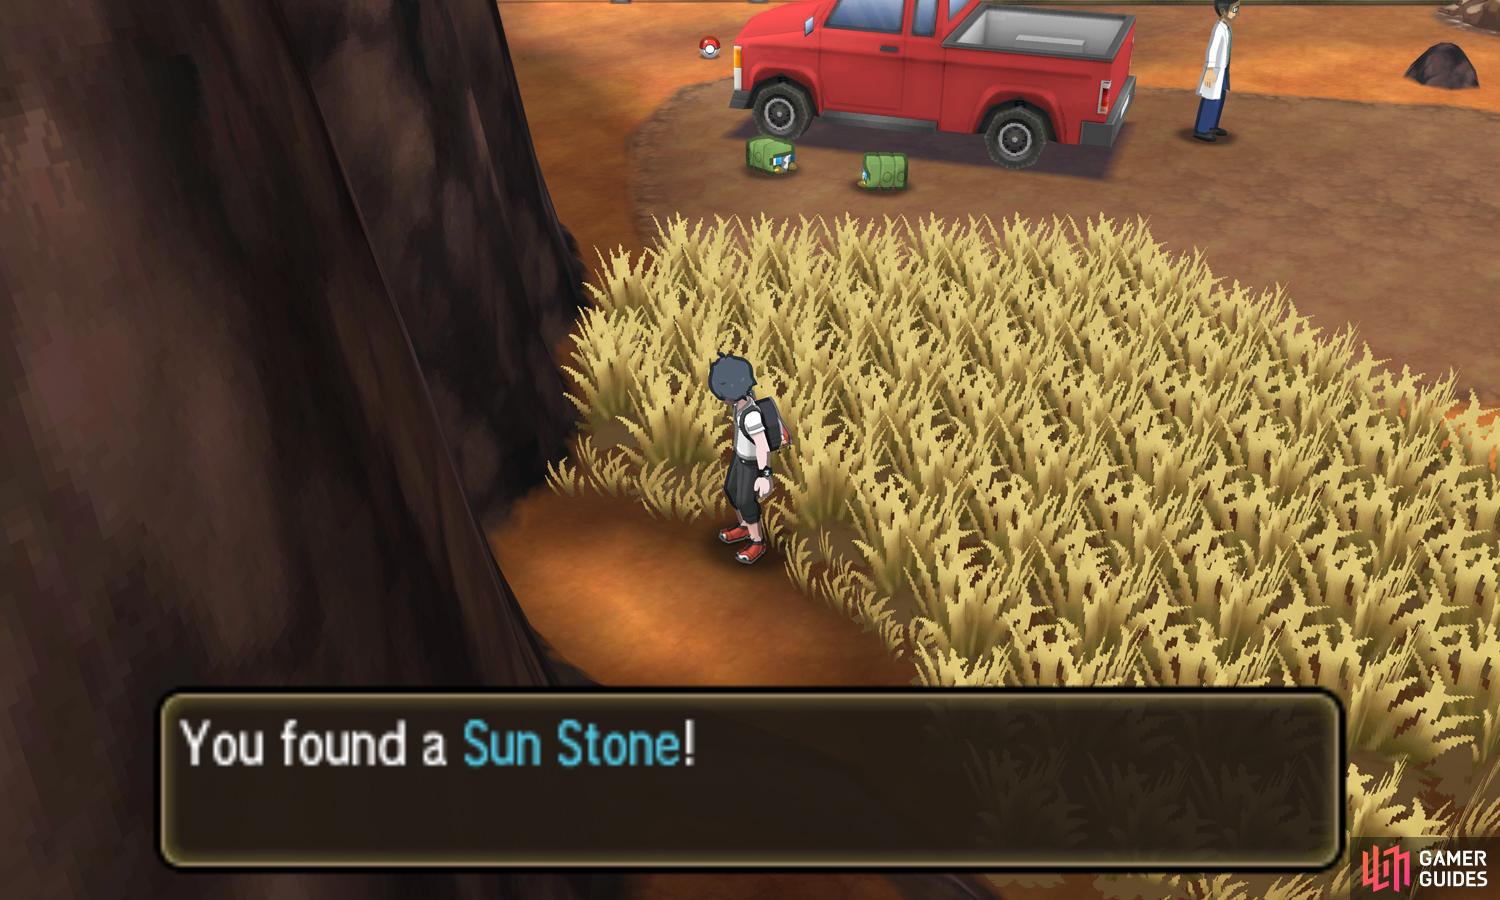 Cottonee and Petilil would really appreciate the Sun Stone